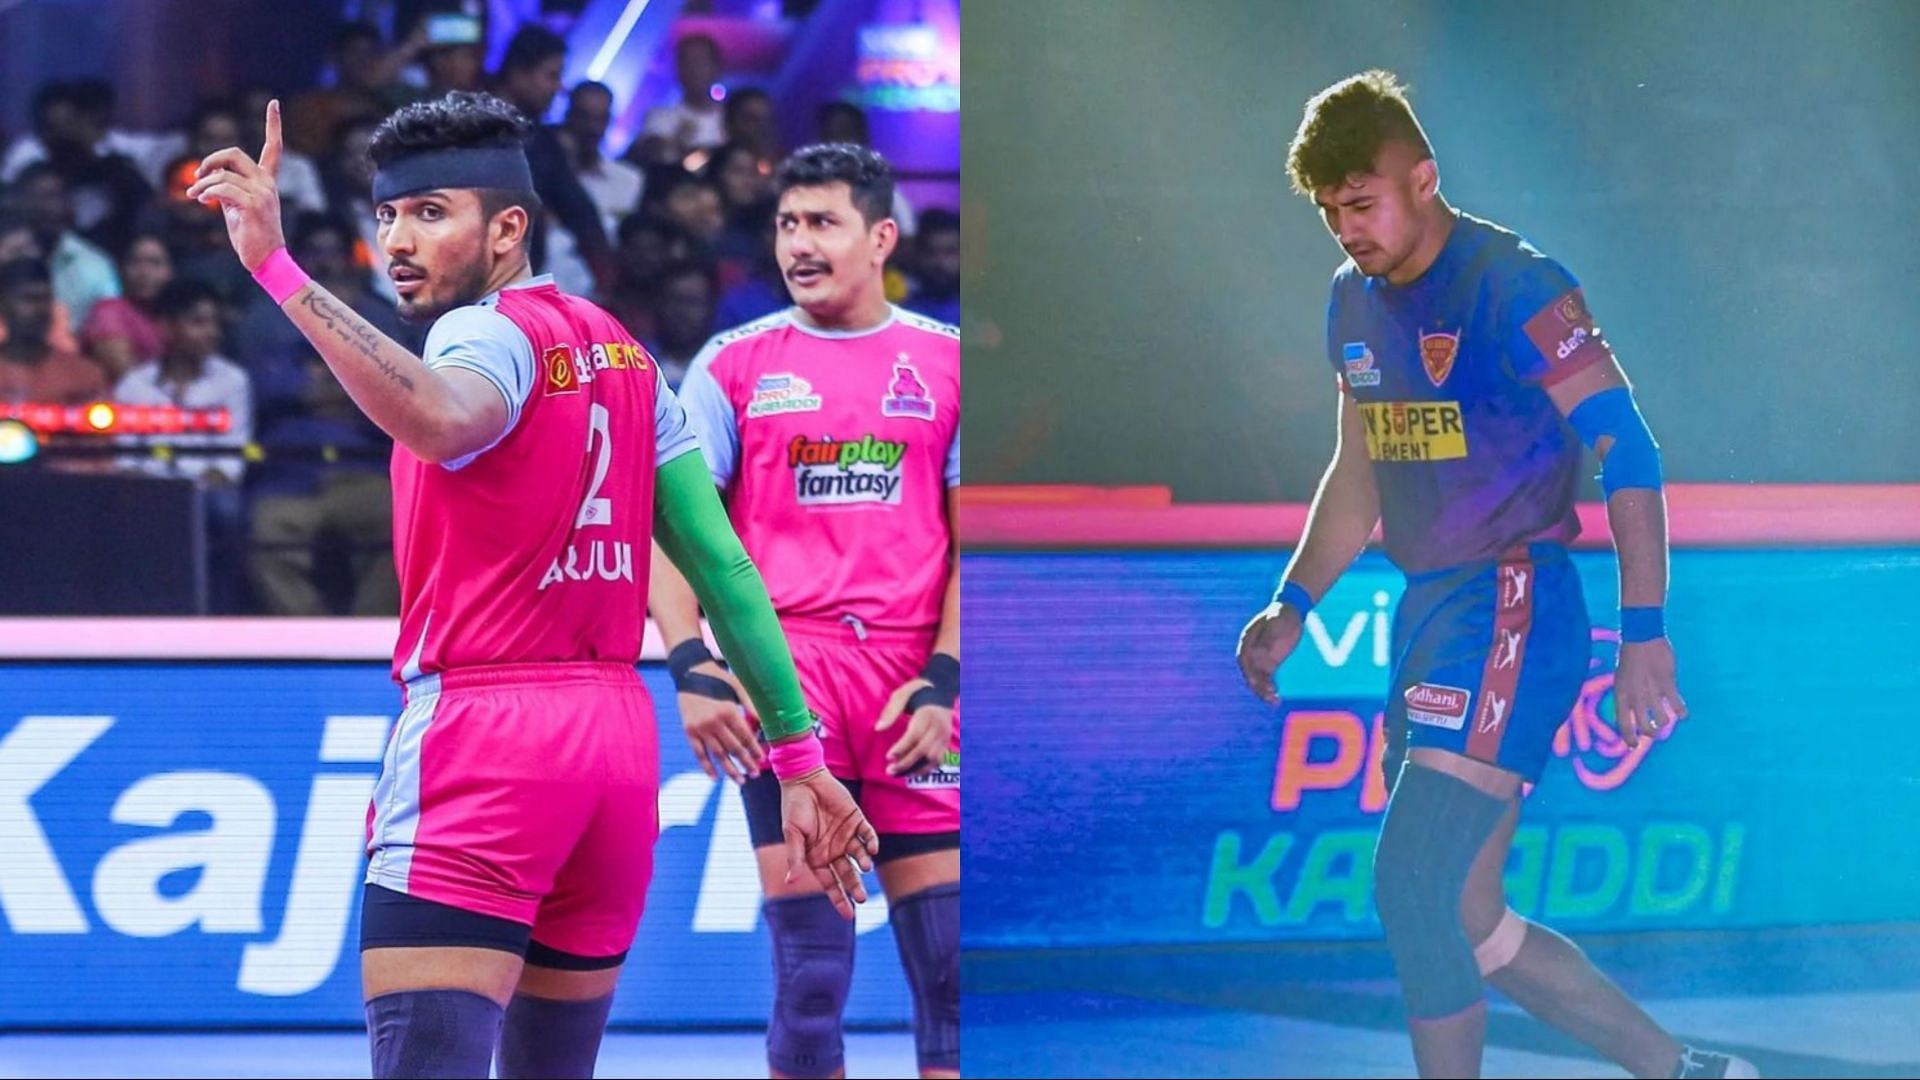 Arjun Deshwal and Naveen Kumar feature on this team (Image: Instagram)